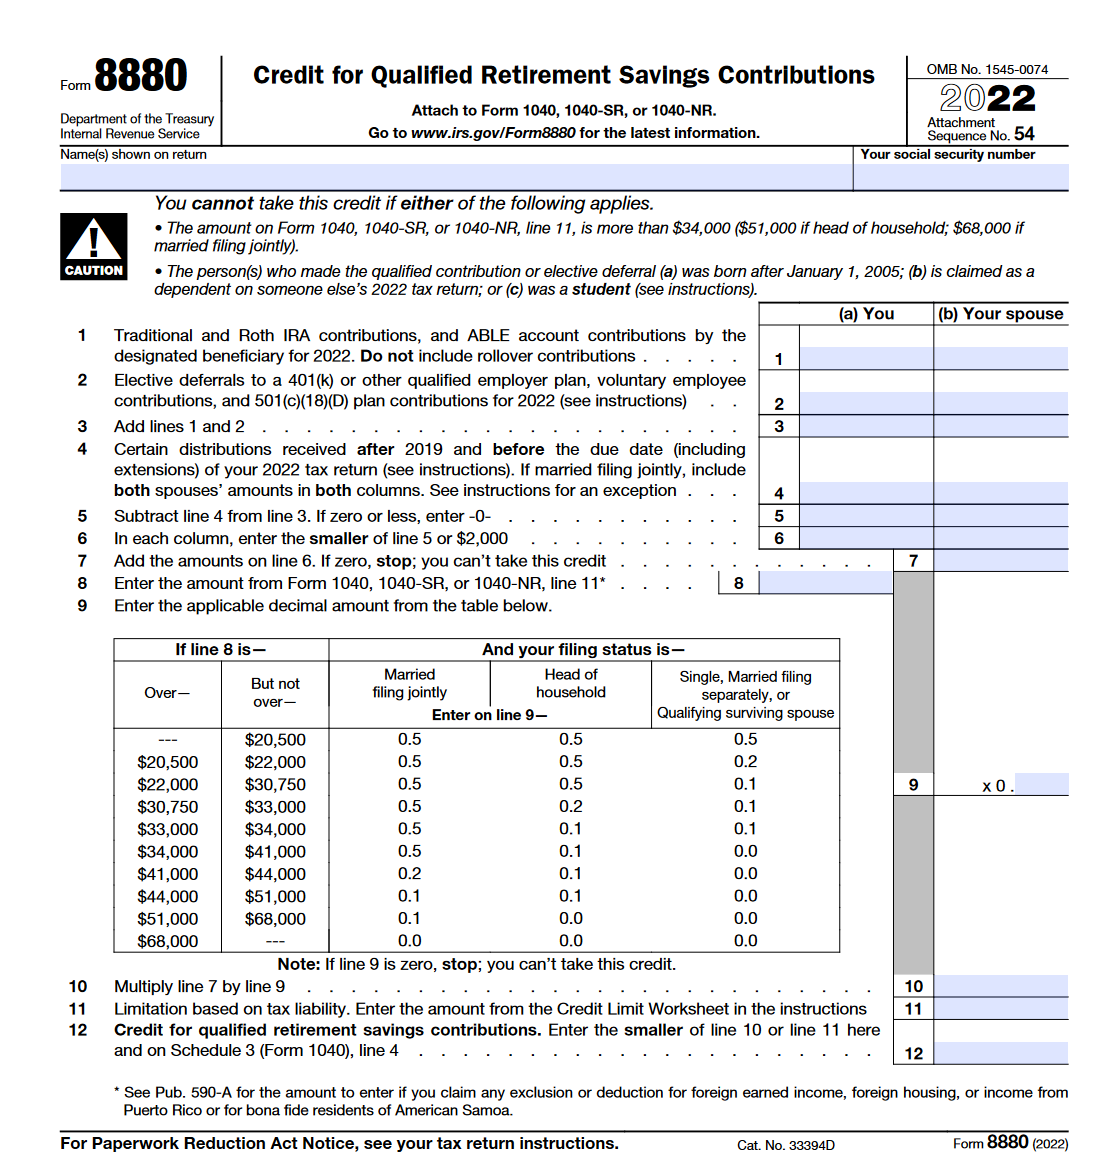 IRS Form 8880 Credit For Qualified Retirement Savings Contributions 